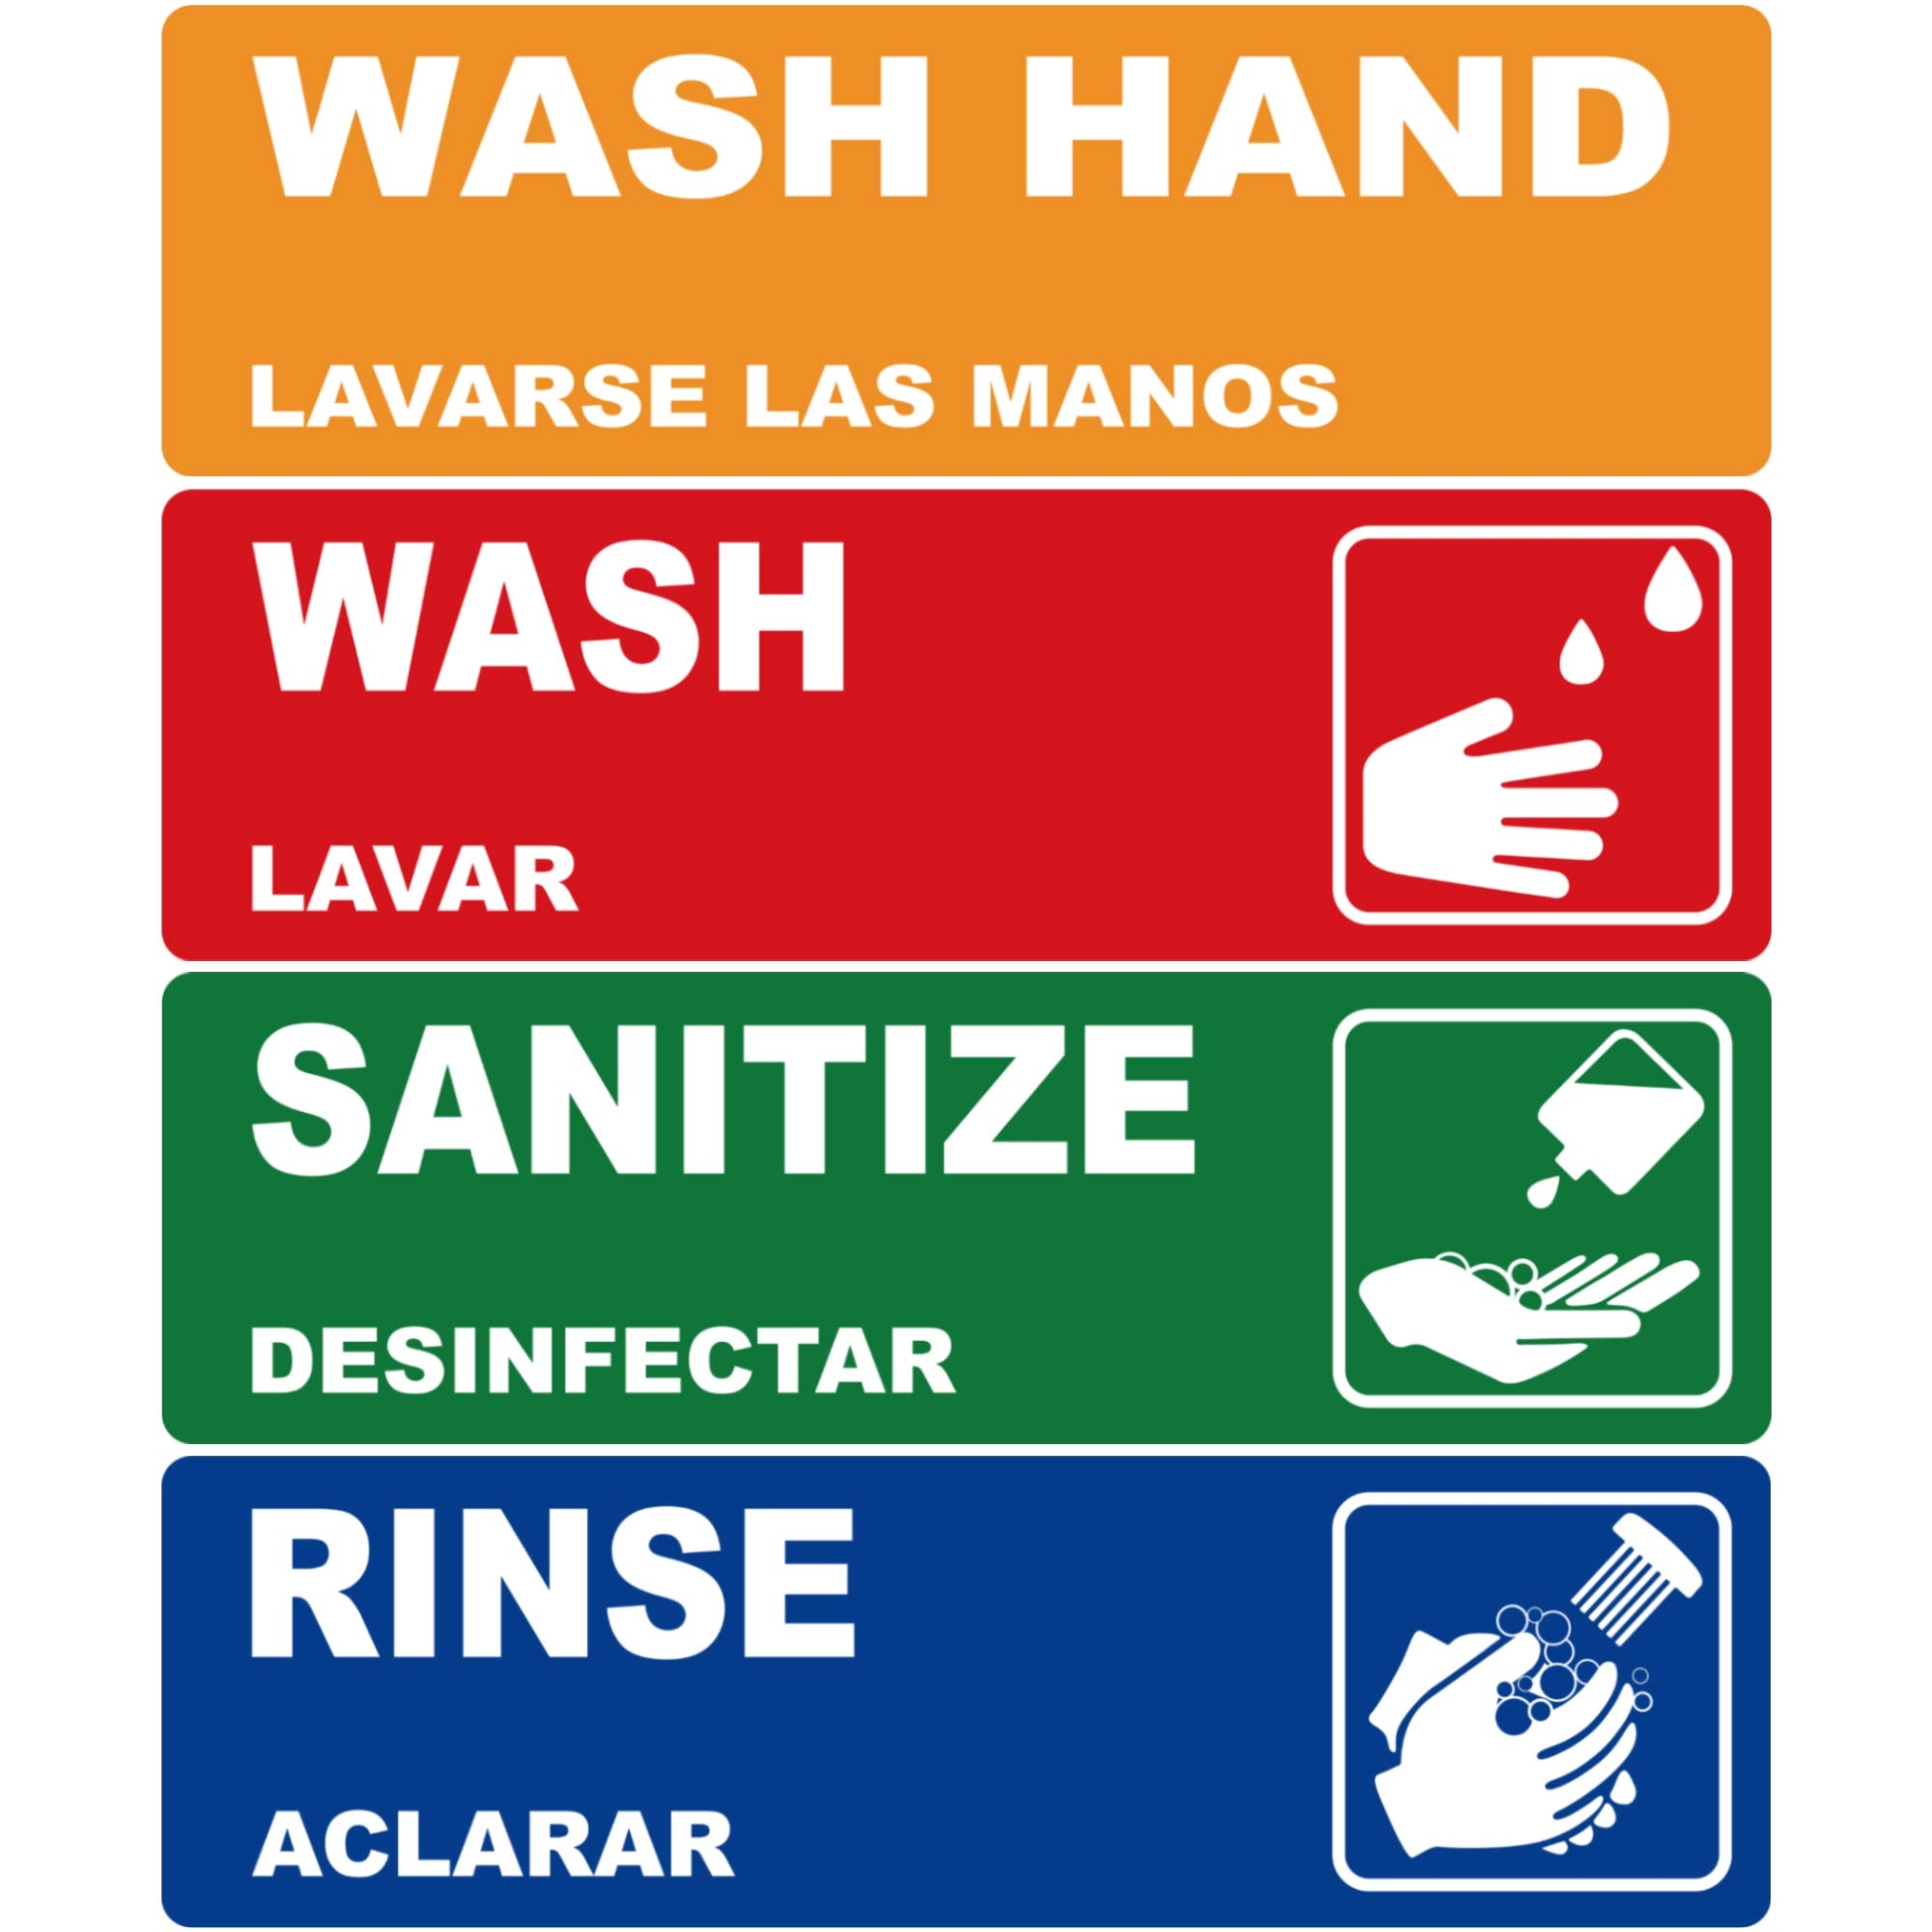 Amazon Wash Rinse Sanitize Handwash Sink Labels Heavy Duty 3 Compartment Sink Waterproof Sticker Signs For Wash Station Commercial Kitchens Restaurant Food Trucks Busing Stations And Dishwashing Industrial Scientific